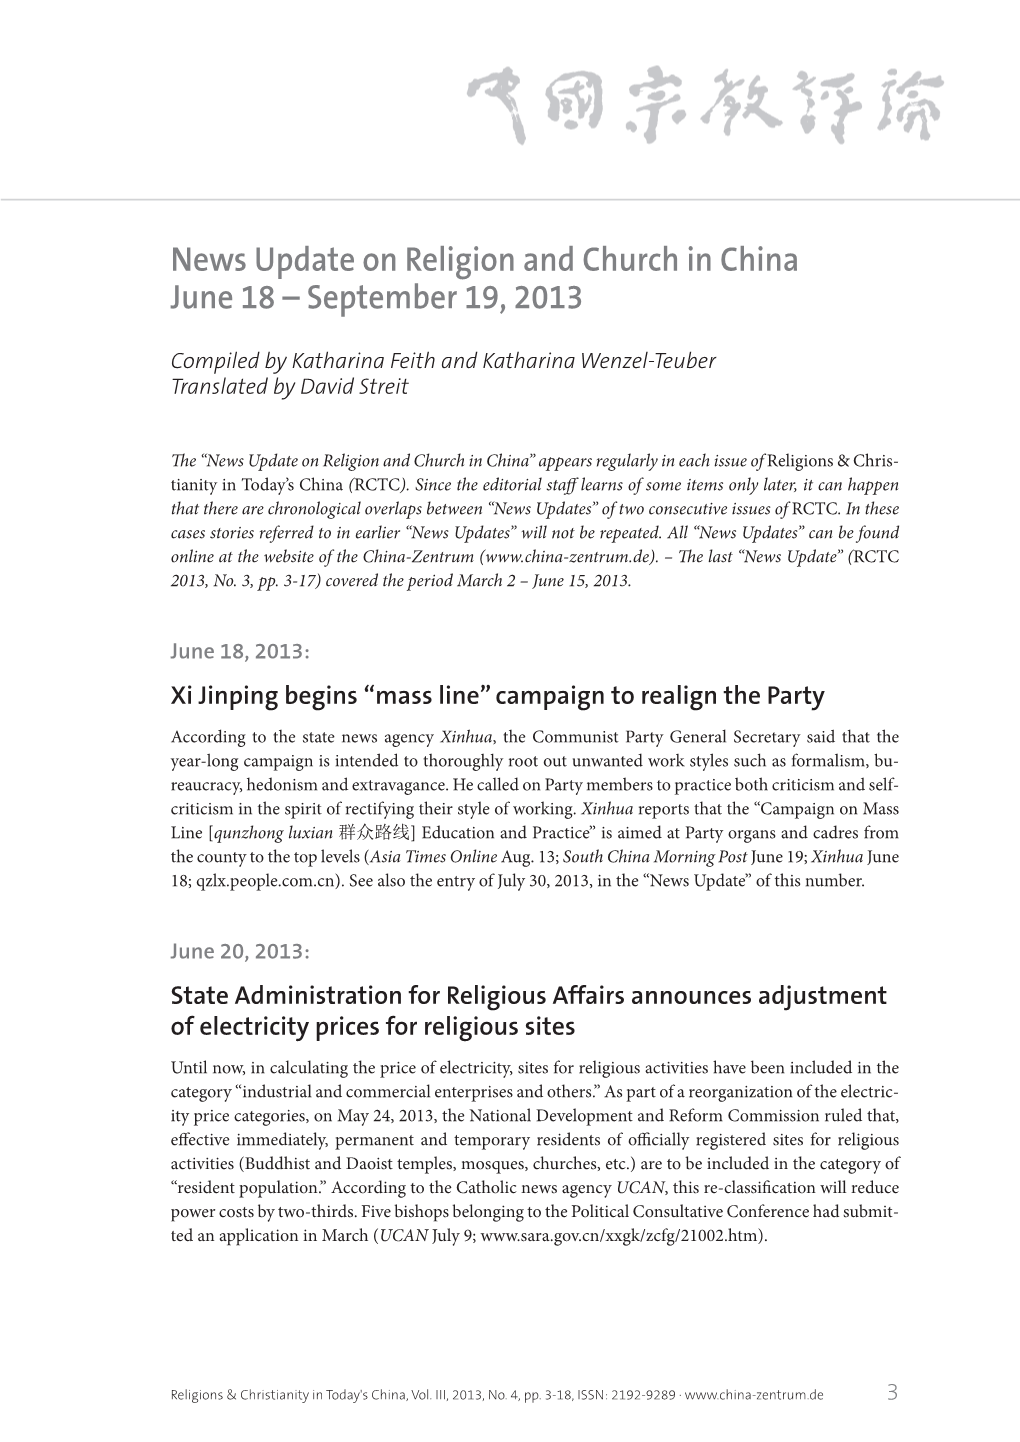 News Update on Religion and Church in China June 18 – September 19, 2013